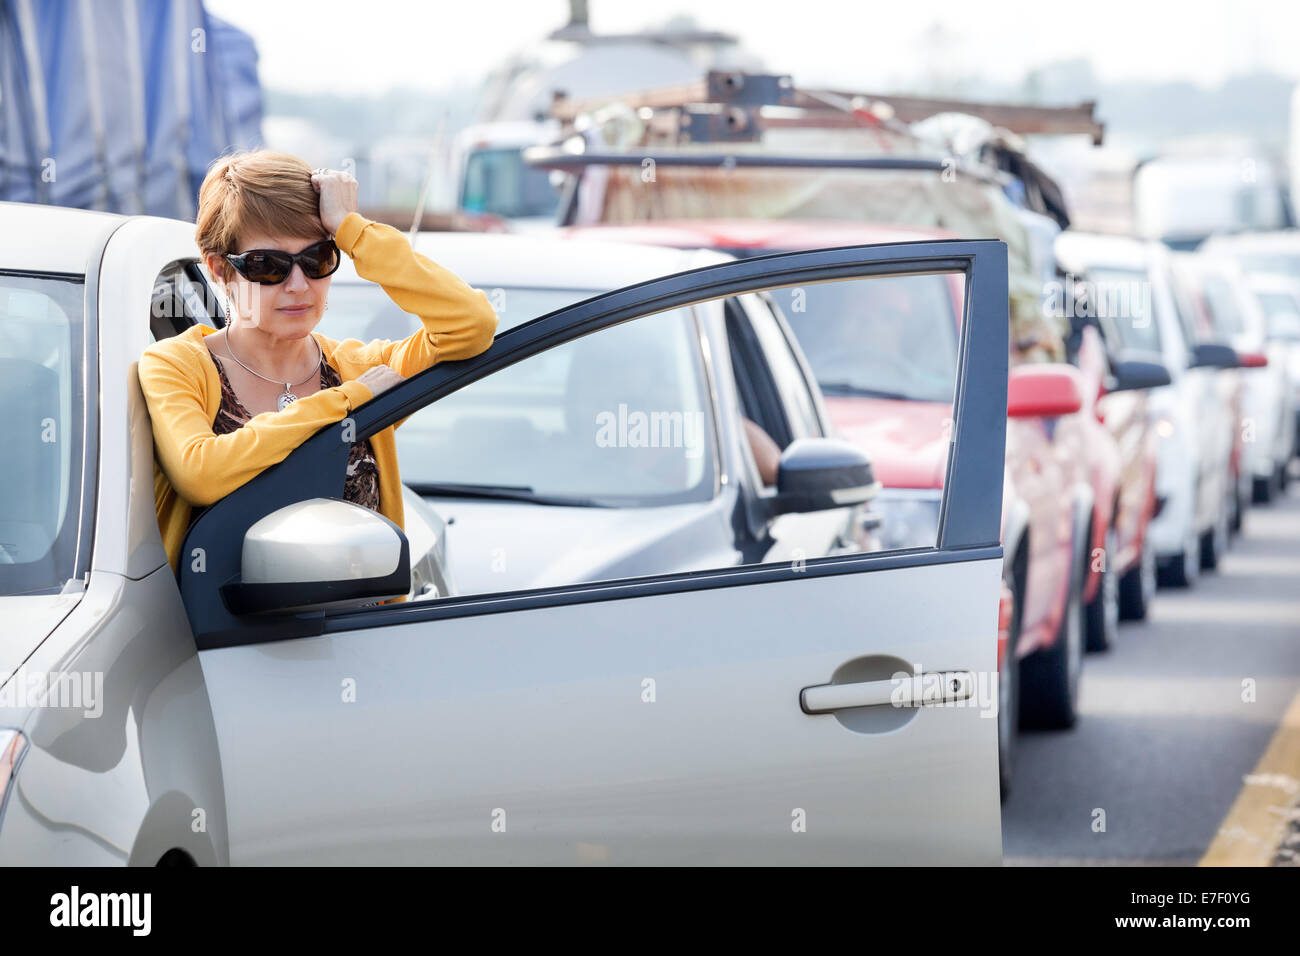 Frustrated middle aged Hispanic woman stuck in a traffic jam. Stock Photo